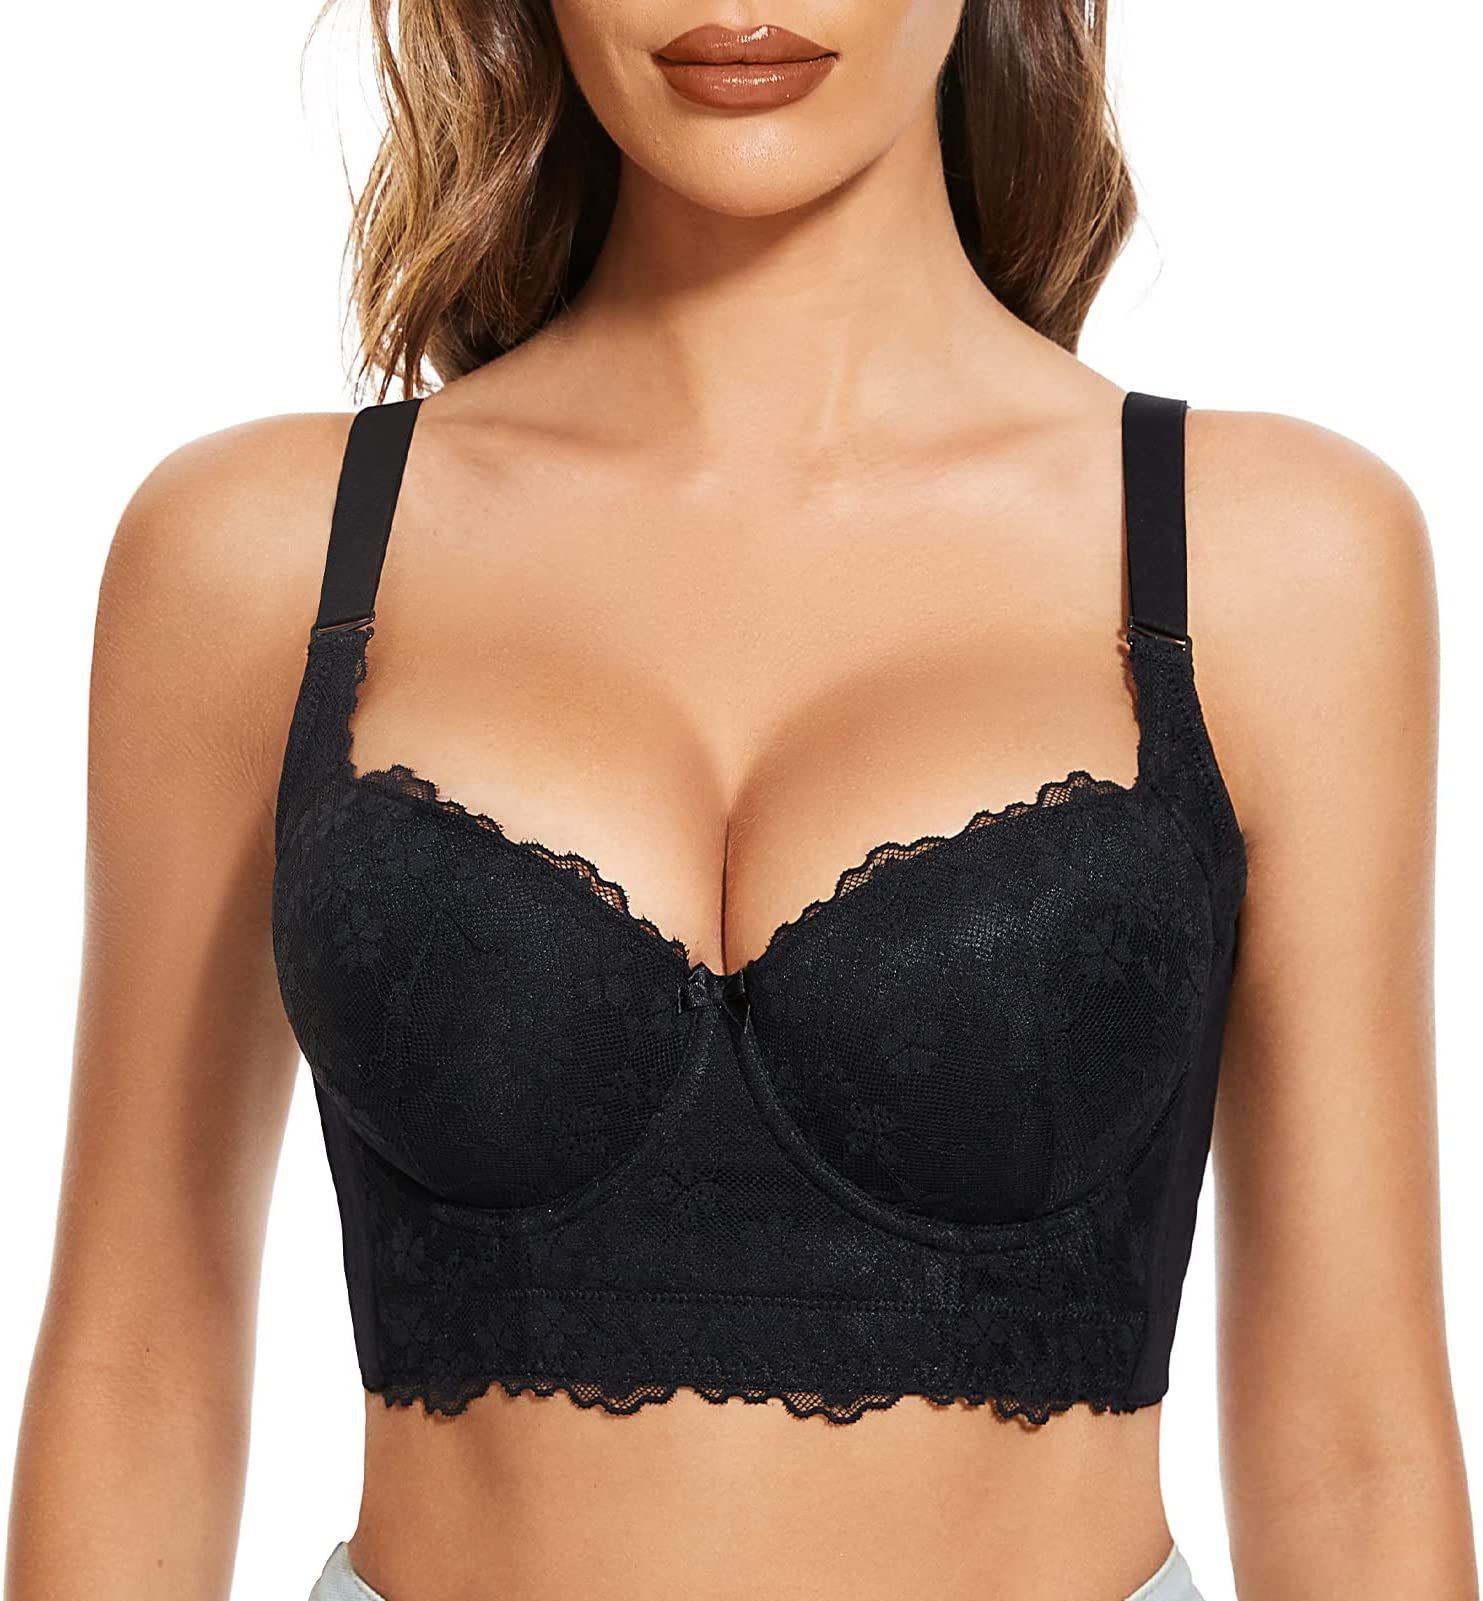 Size
Suggestion For Bustier Bra